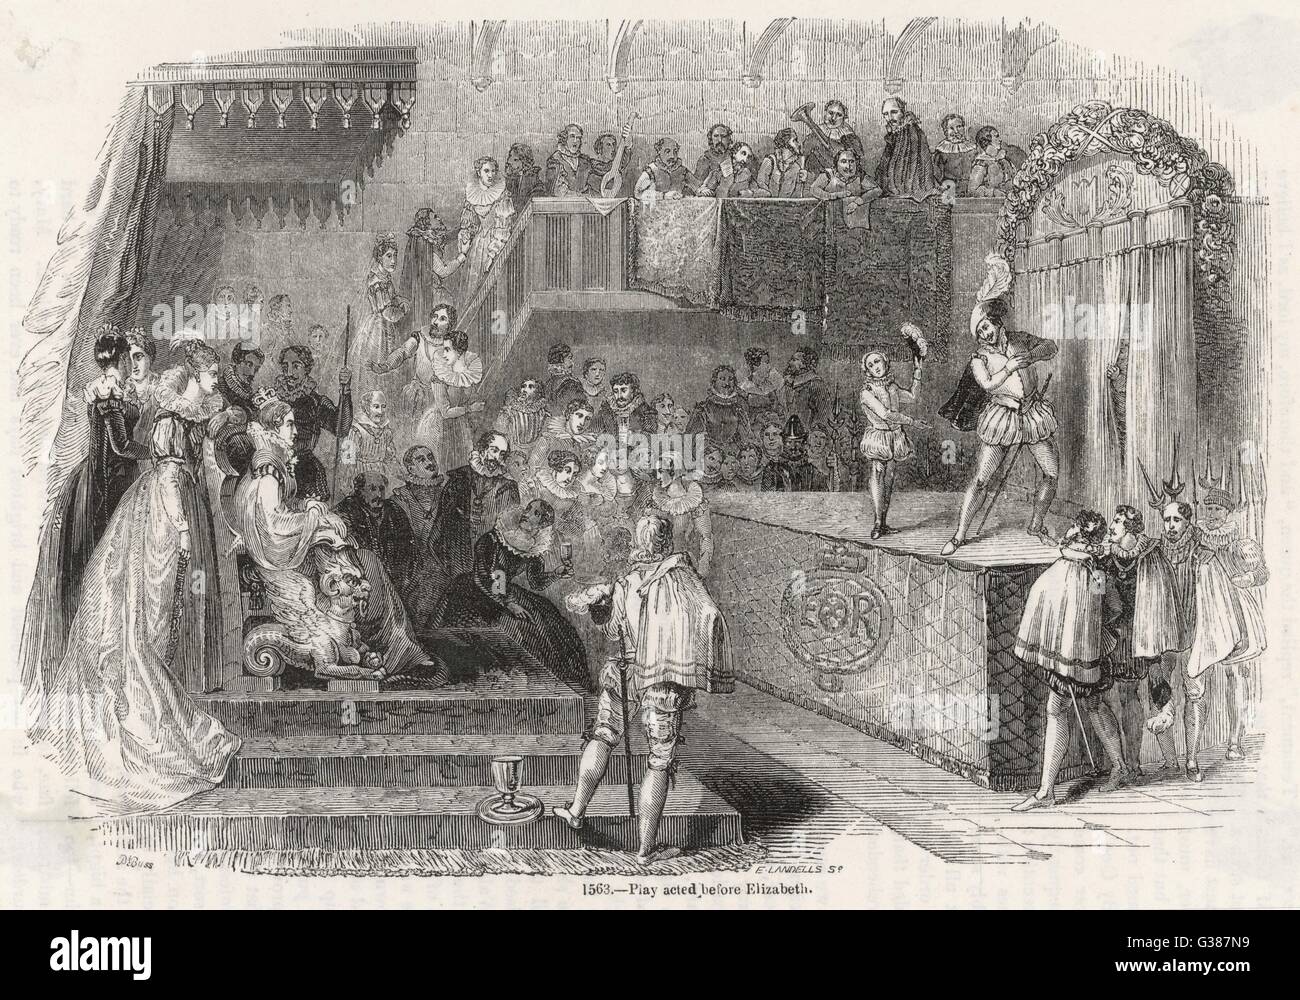 A command performance - Queen Elizabeth I watches a play in one of her ...